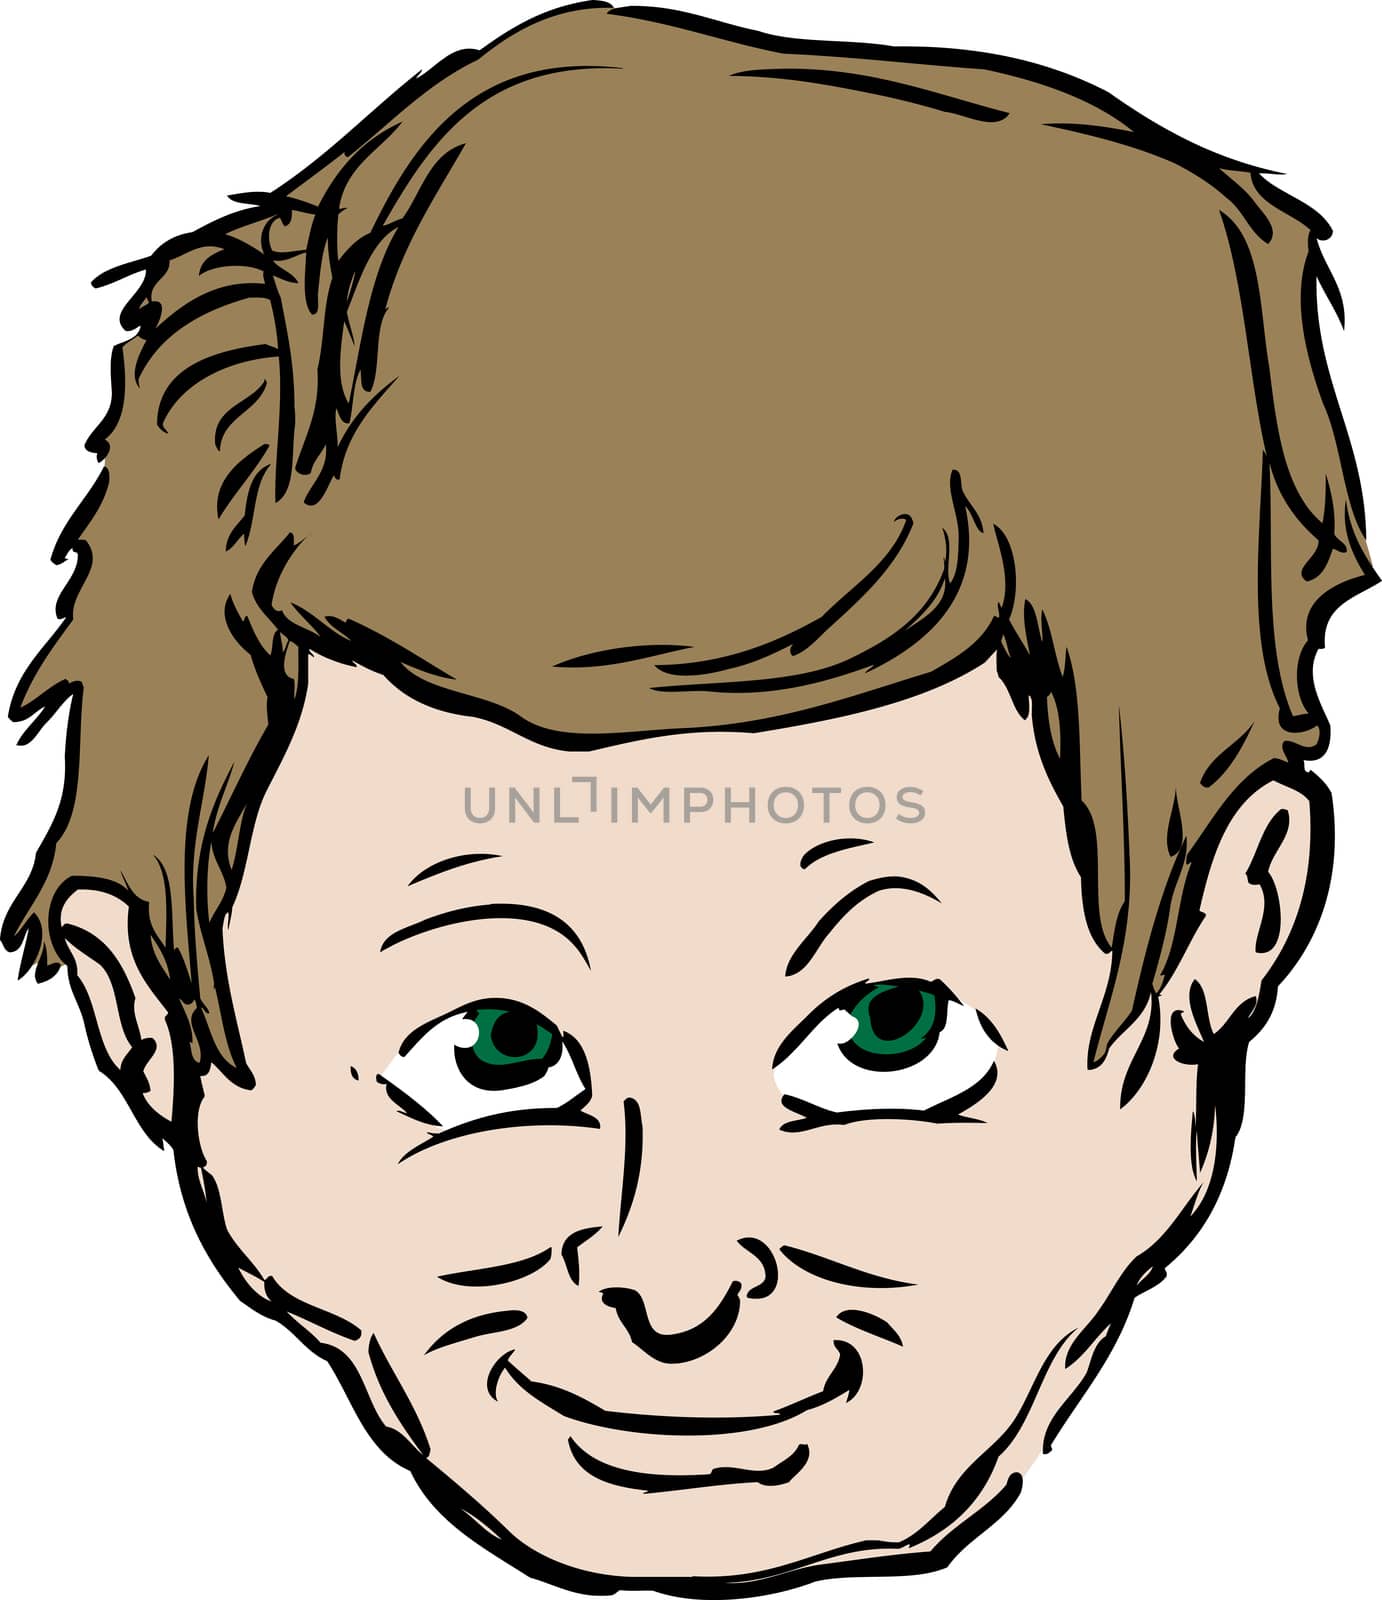 Outline of face of grinning man over isolated white background